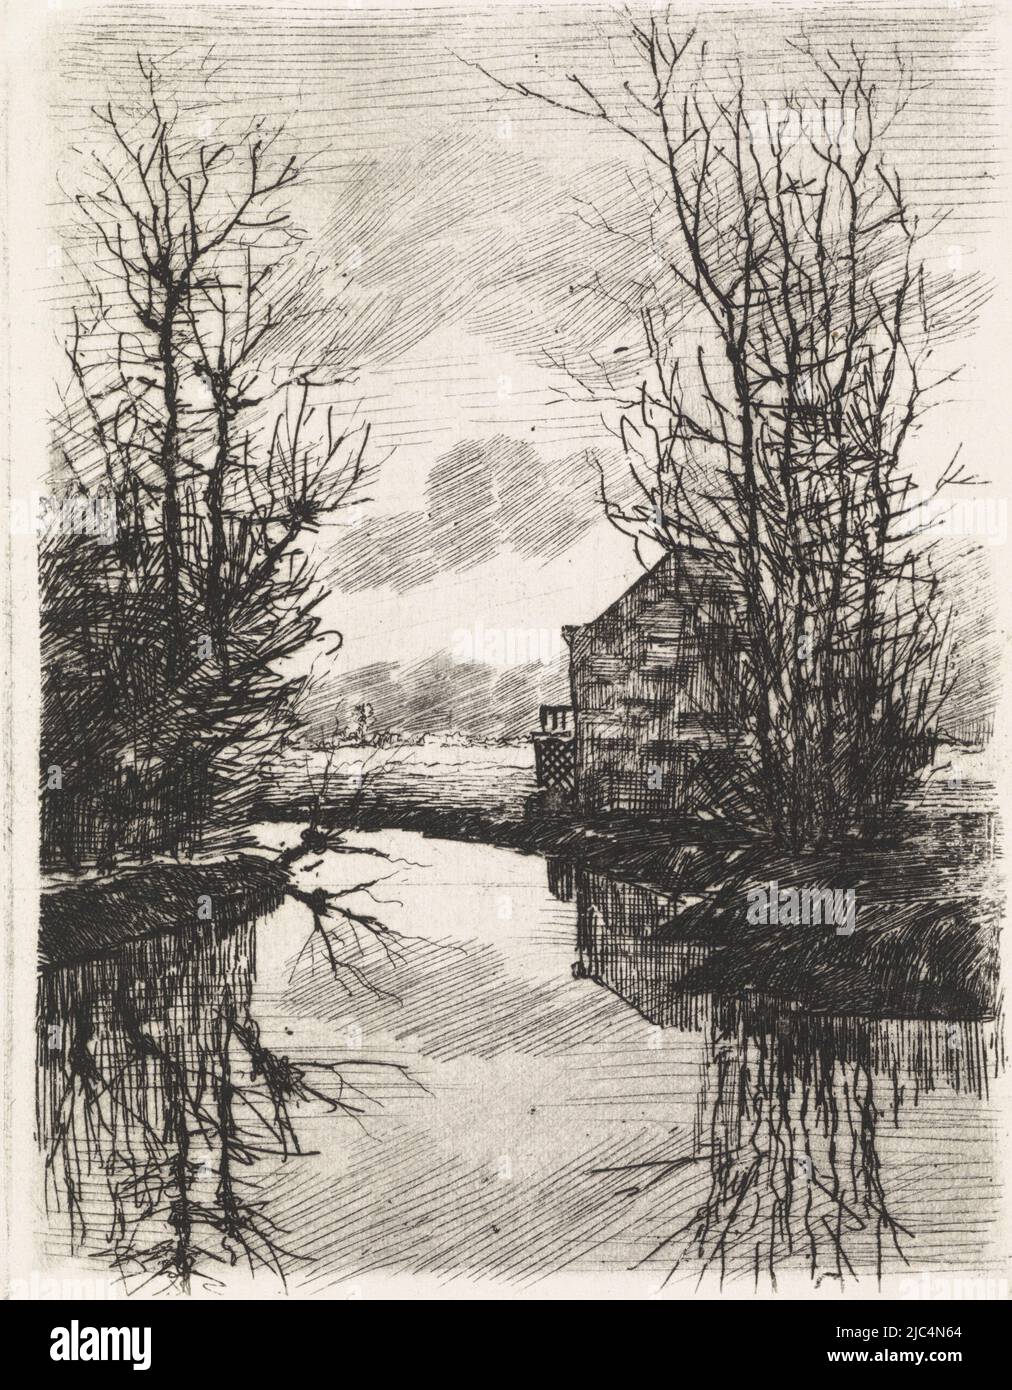 House and trees by the water, print maker: Elias Stark, Netherlands, 1859 - 1890, paper, etching, h 141 mm × w 105 mm Stock Photo